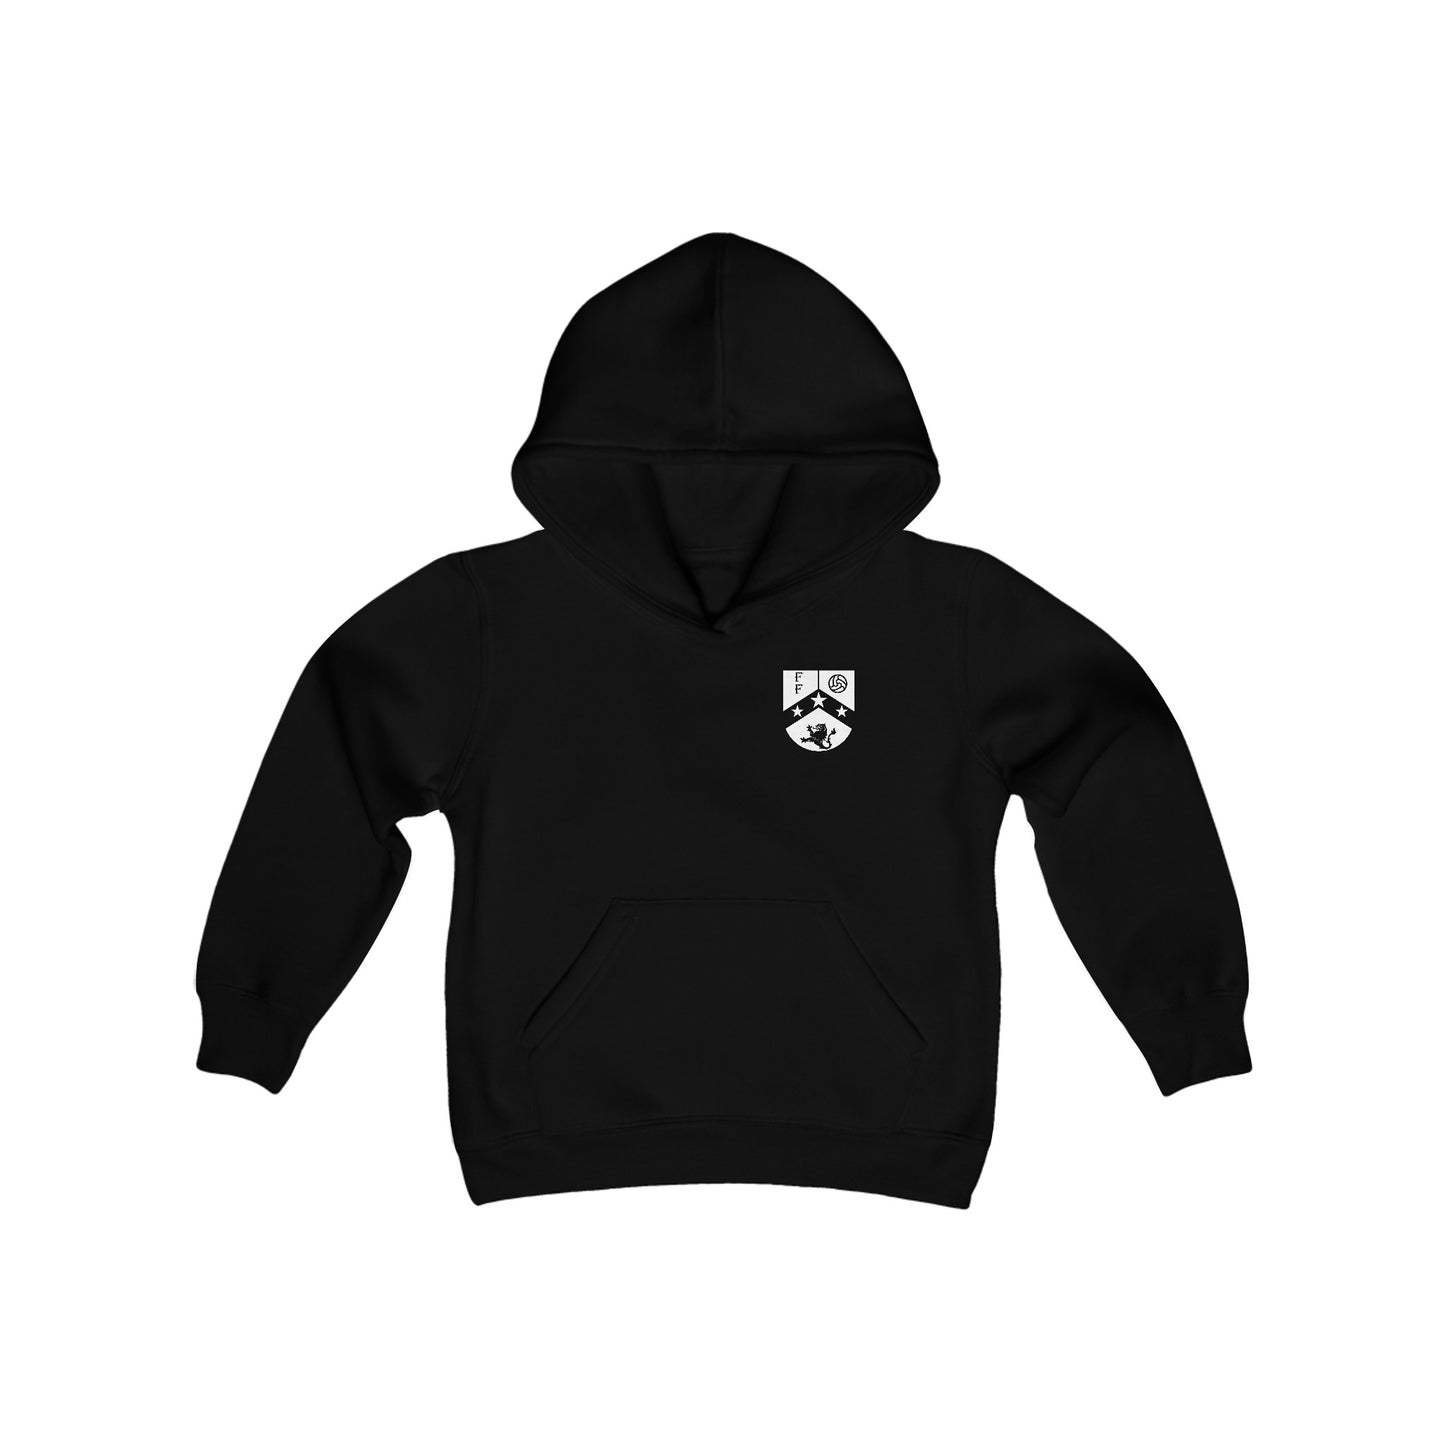 Fierce Futbol Lions Pitch Invaders Youth Hoodie (Unisex)